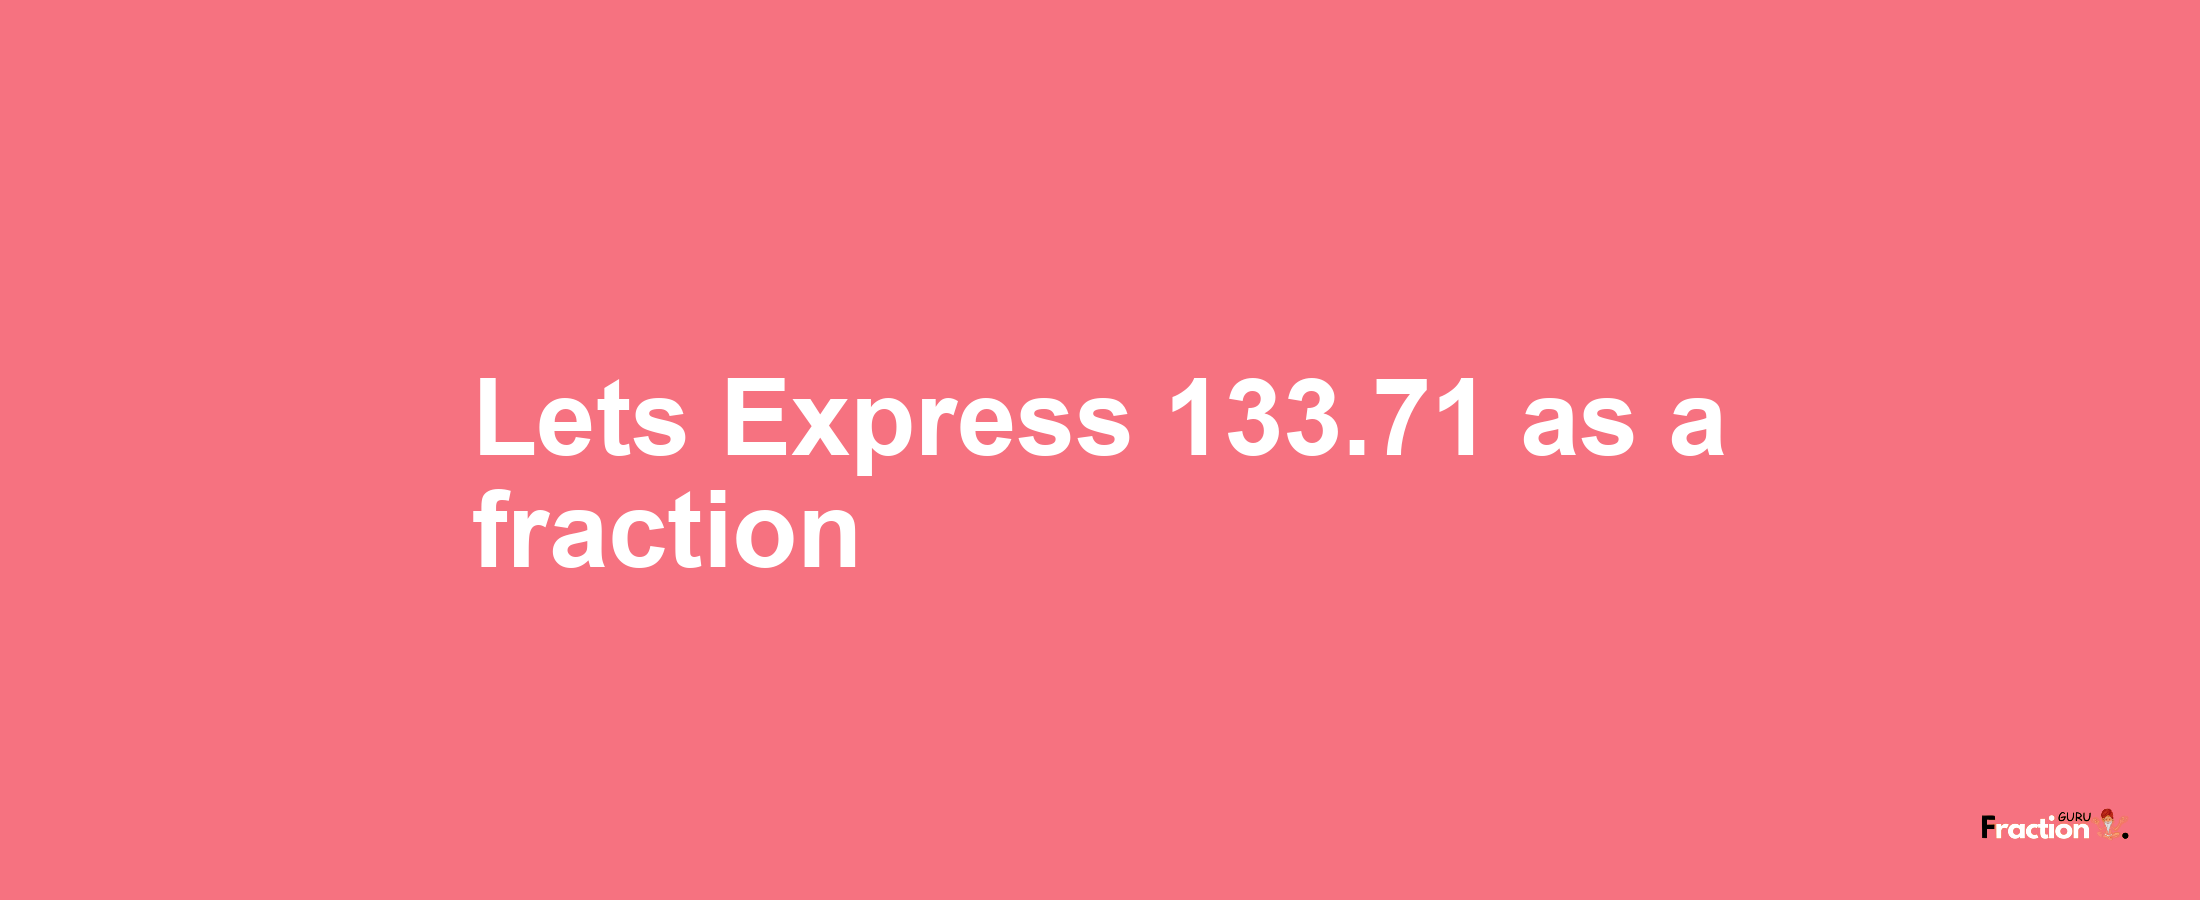 Lets Express 133.71 as afraction